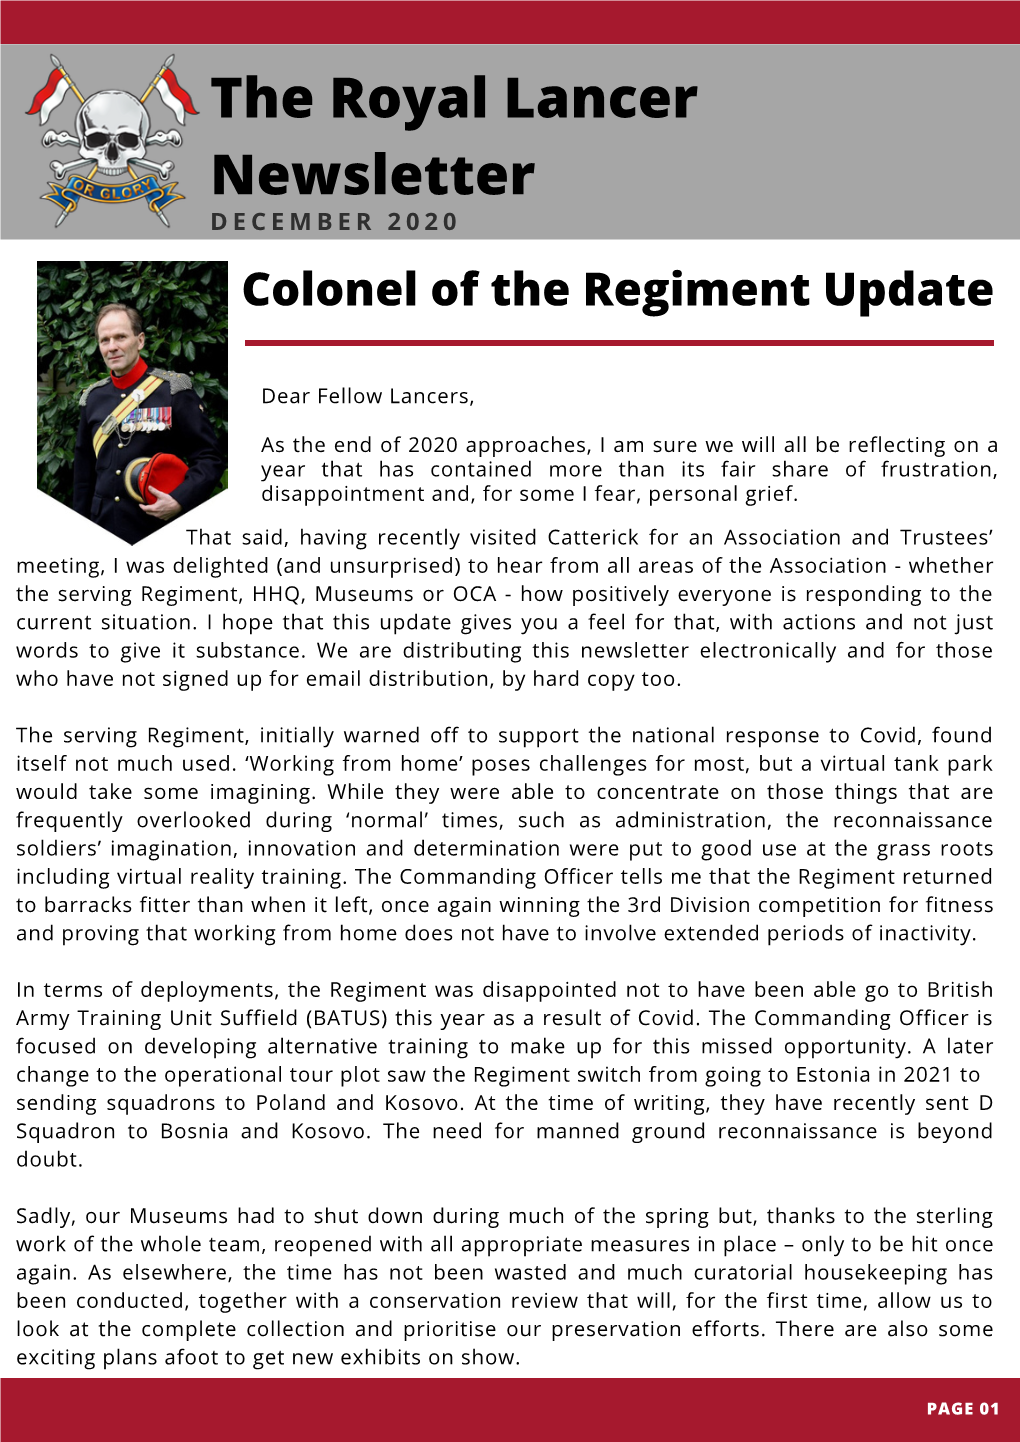 Colonel of the Regiment Update